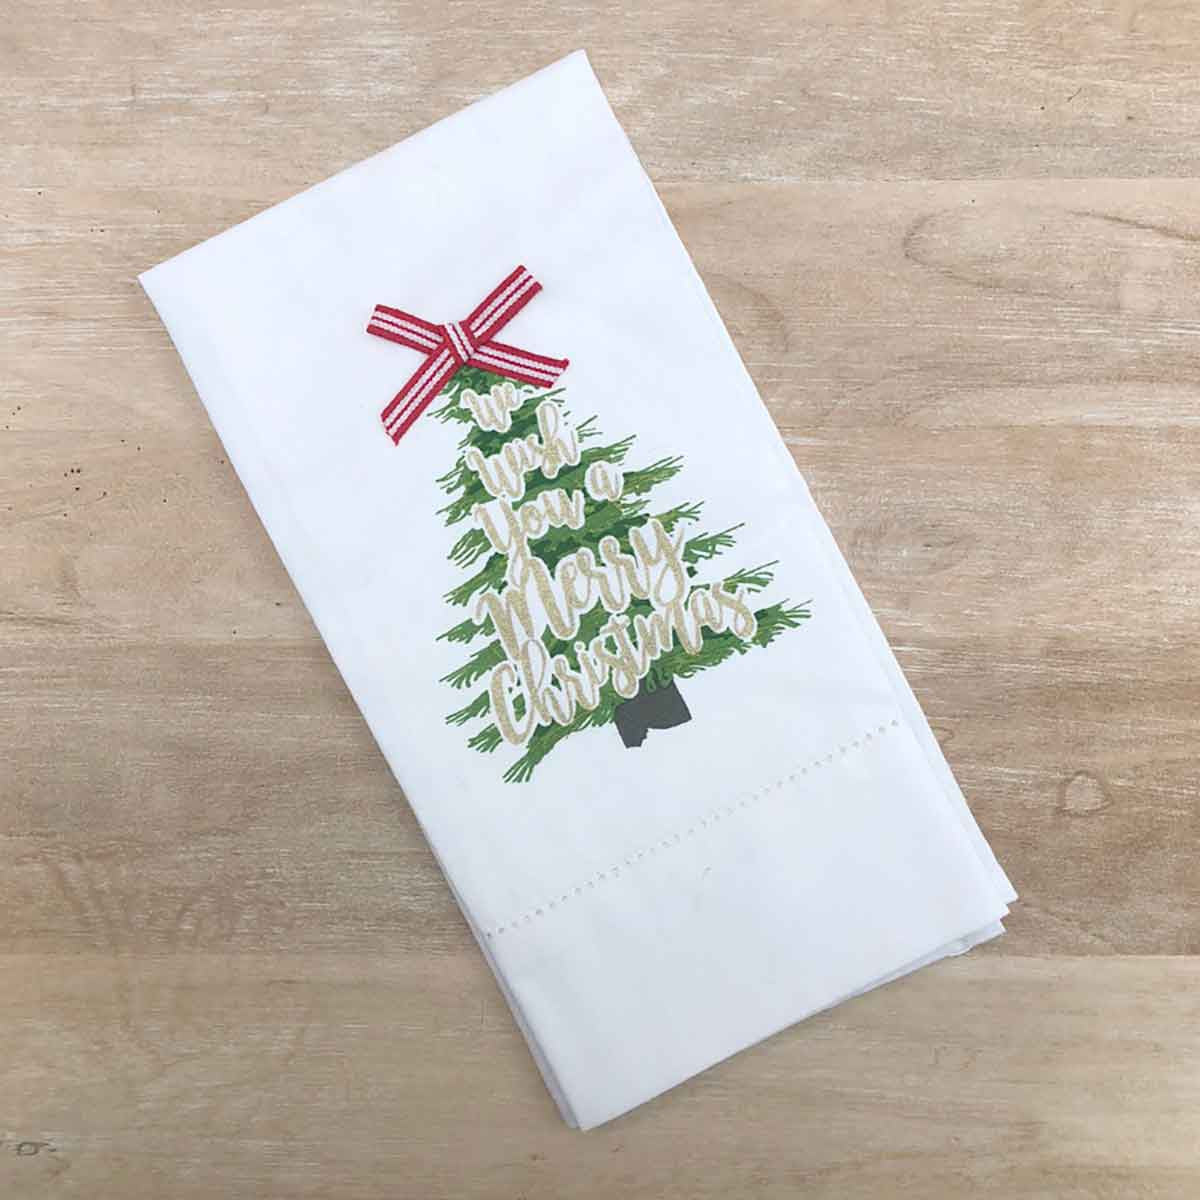 Season's Greetings Hand Towel | DOORBUSTER-Tea Towel-The Royal Standard-The Village Shoppe, Women’s Fashion Boutique, Shop Online and In Store - Located in Muscle Shoals, AL.